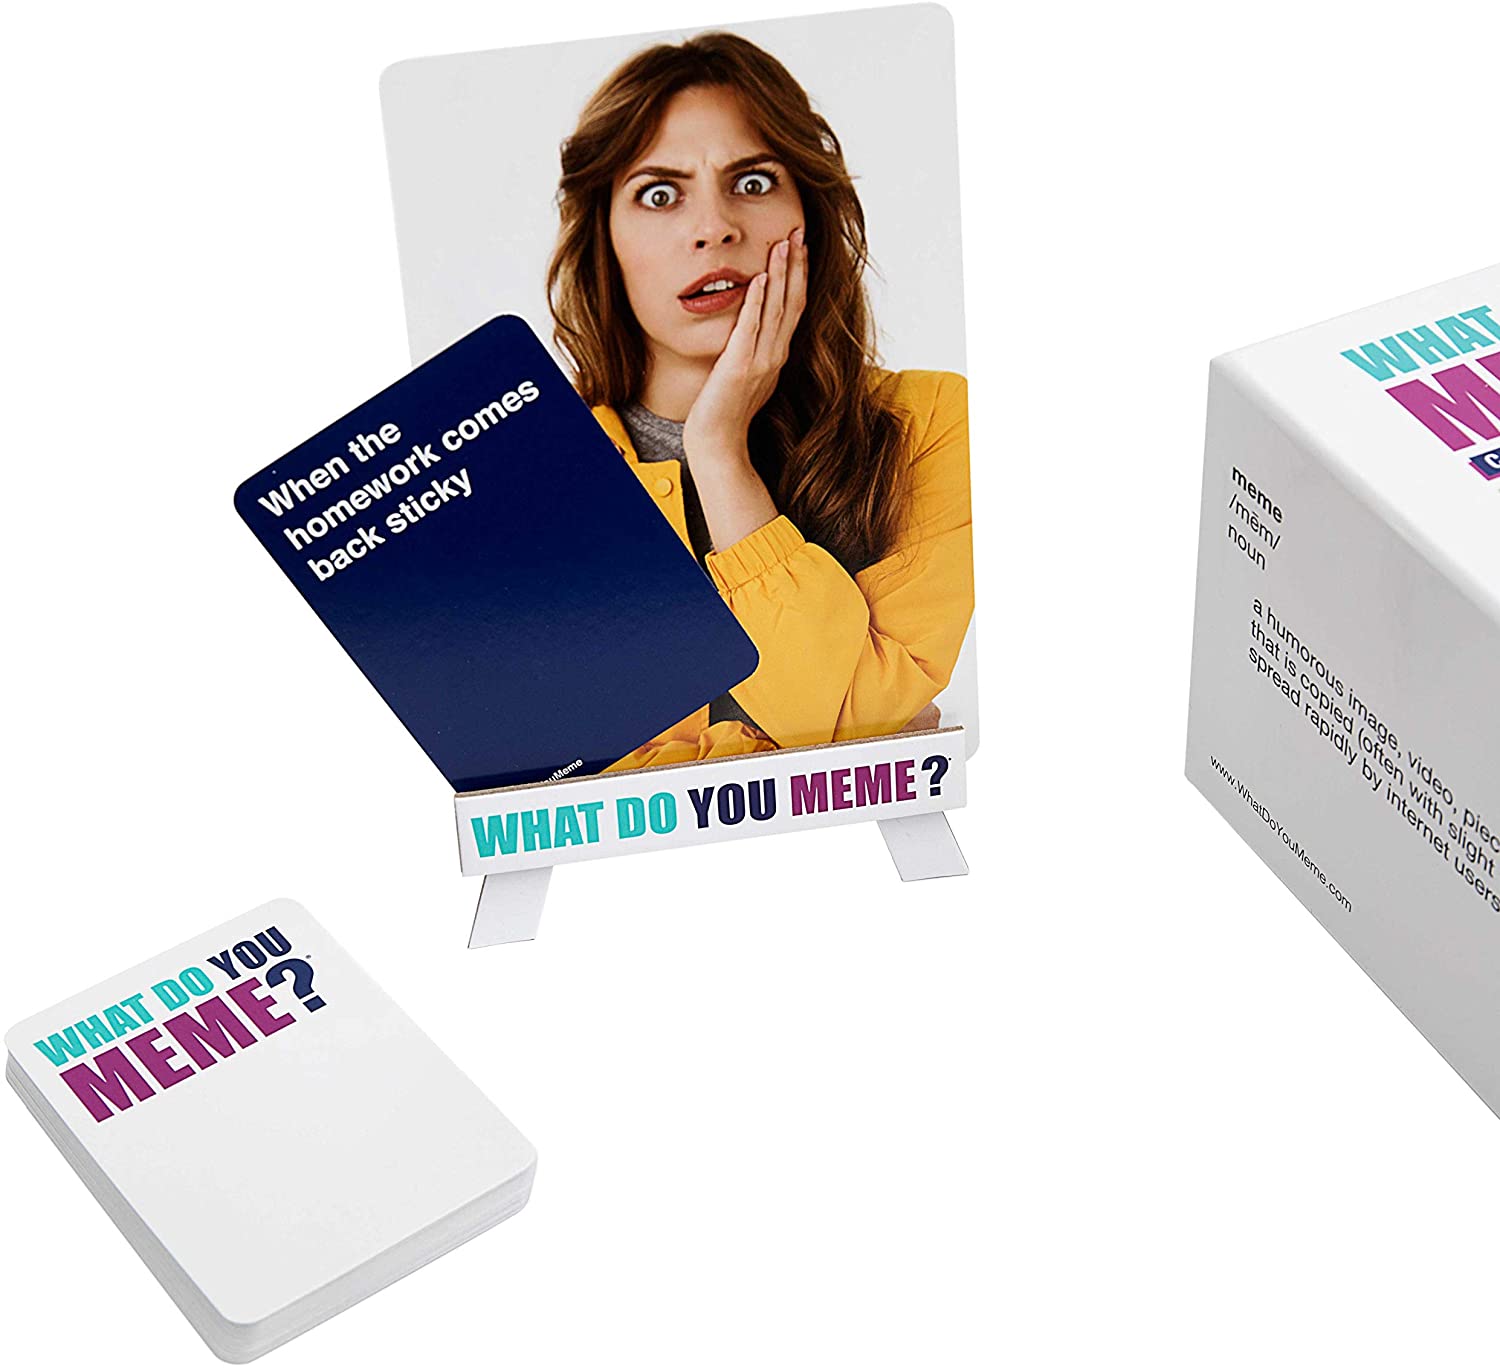 What Do You Meme? Teacher's Edition - the Adult Party Card Game